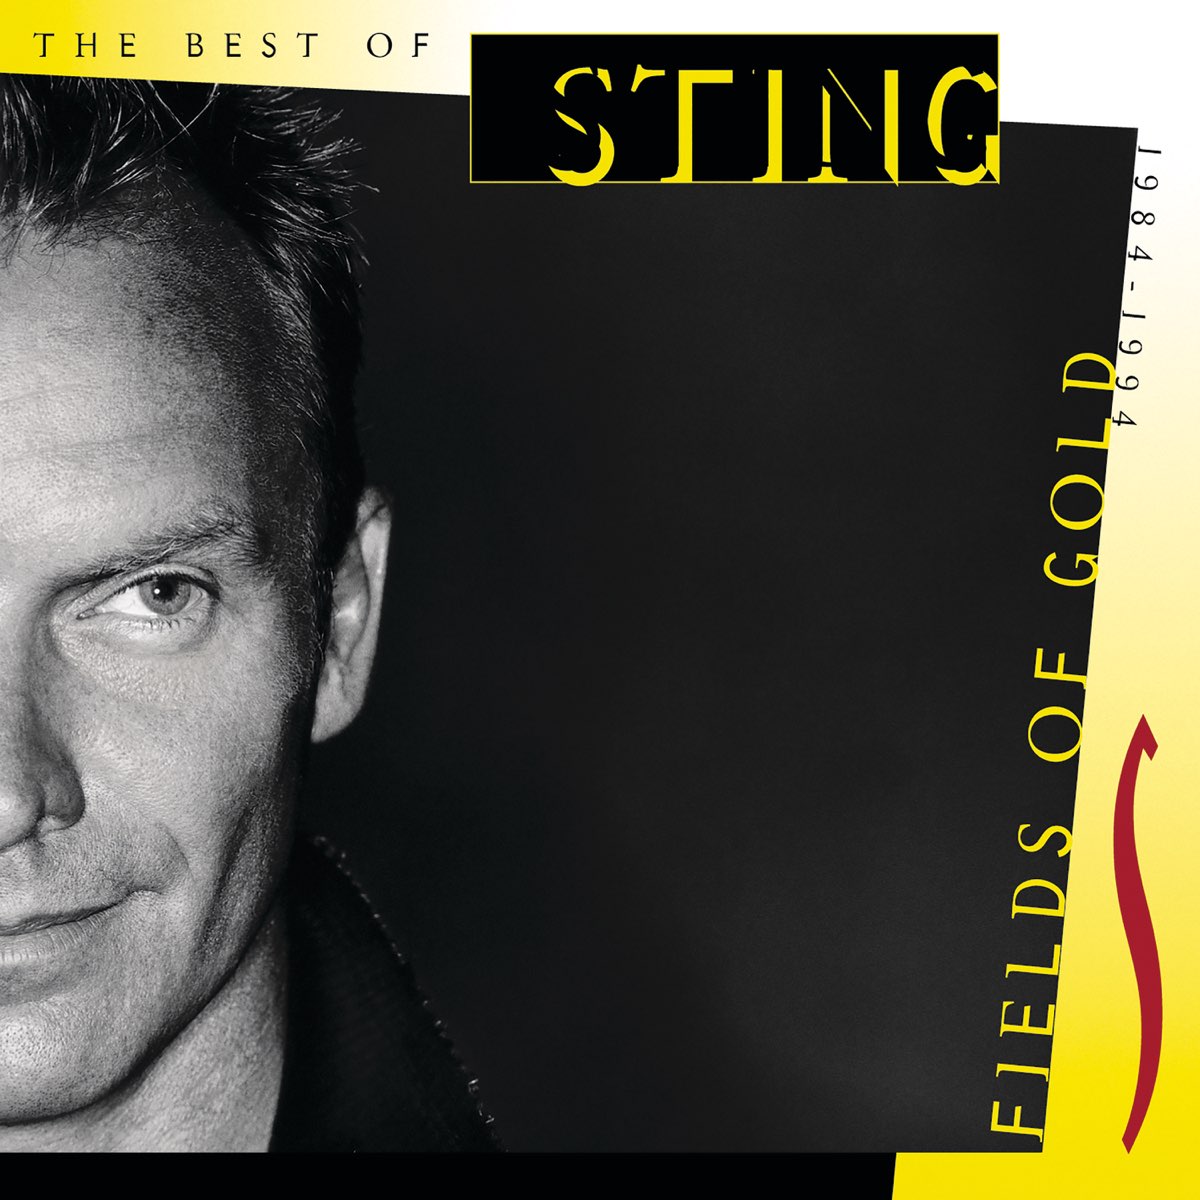 Fields of Gold: The Best of Sting 1984-1994 par Sting sur Apple Music